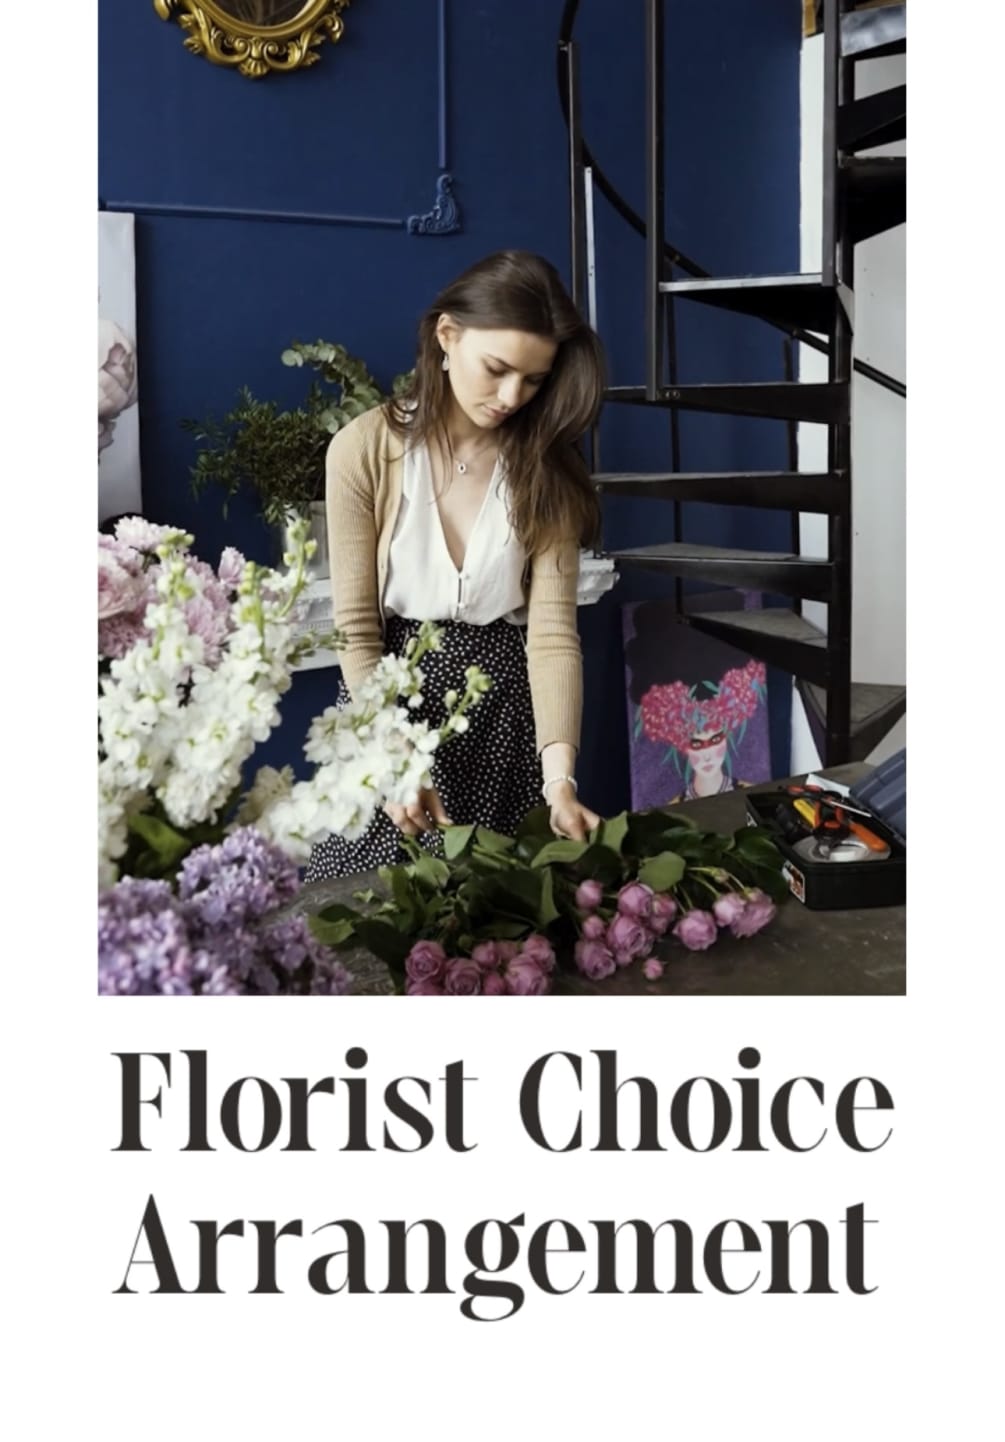 Let the professional florist choose the freshest blooms this season and the